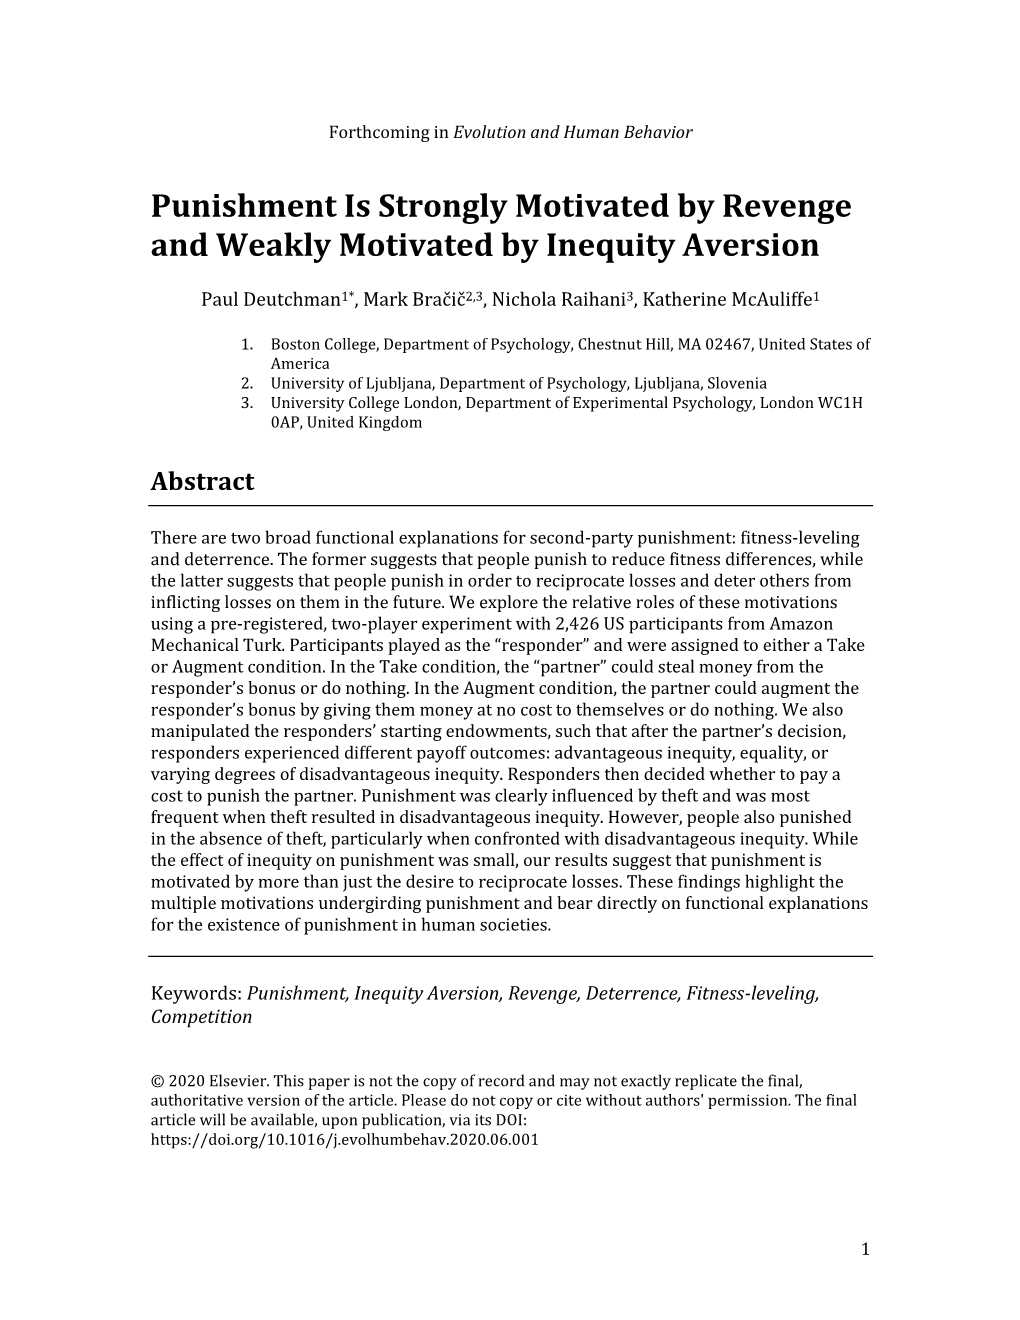 Punishment Is Strongly Motivated by Revenge and Weakly Motivated by Inequity Aversion